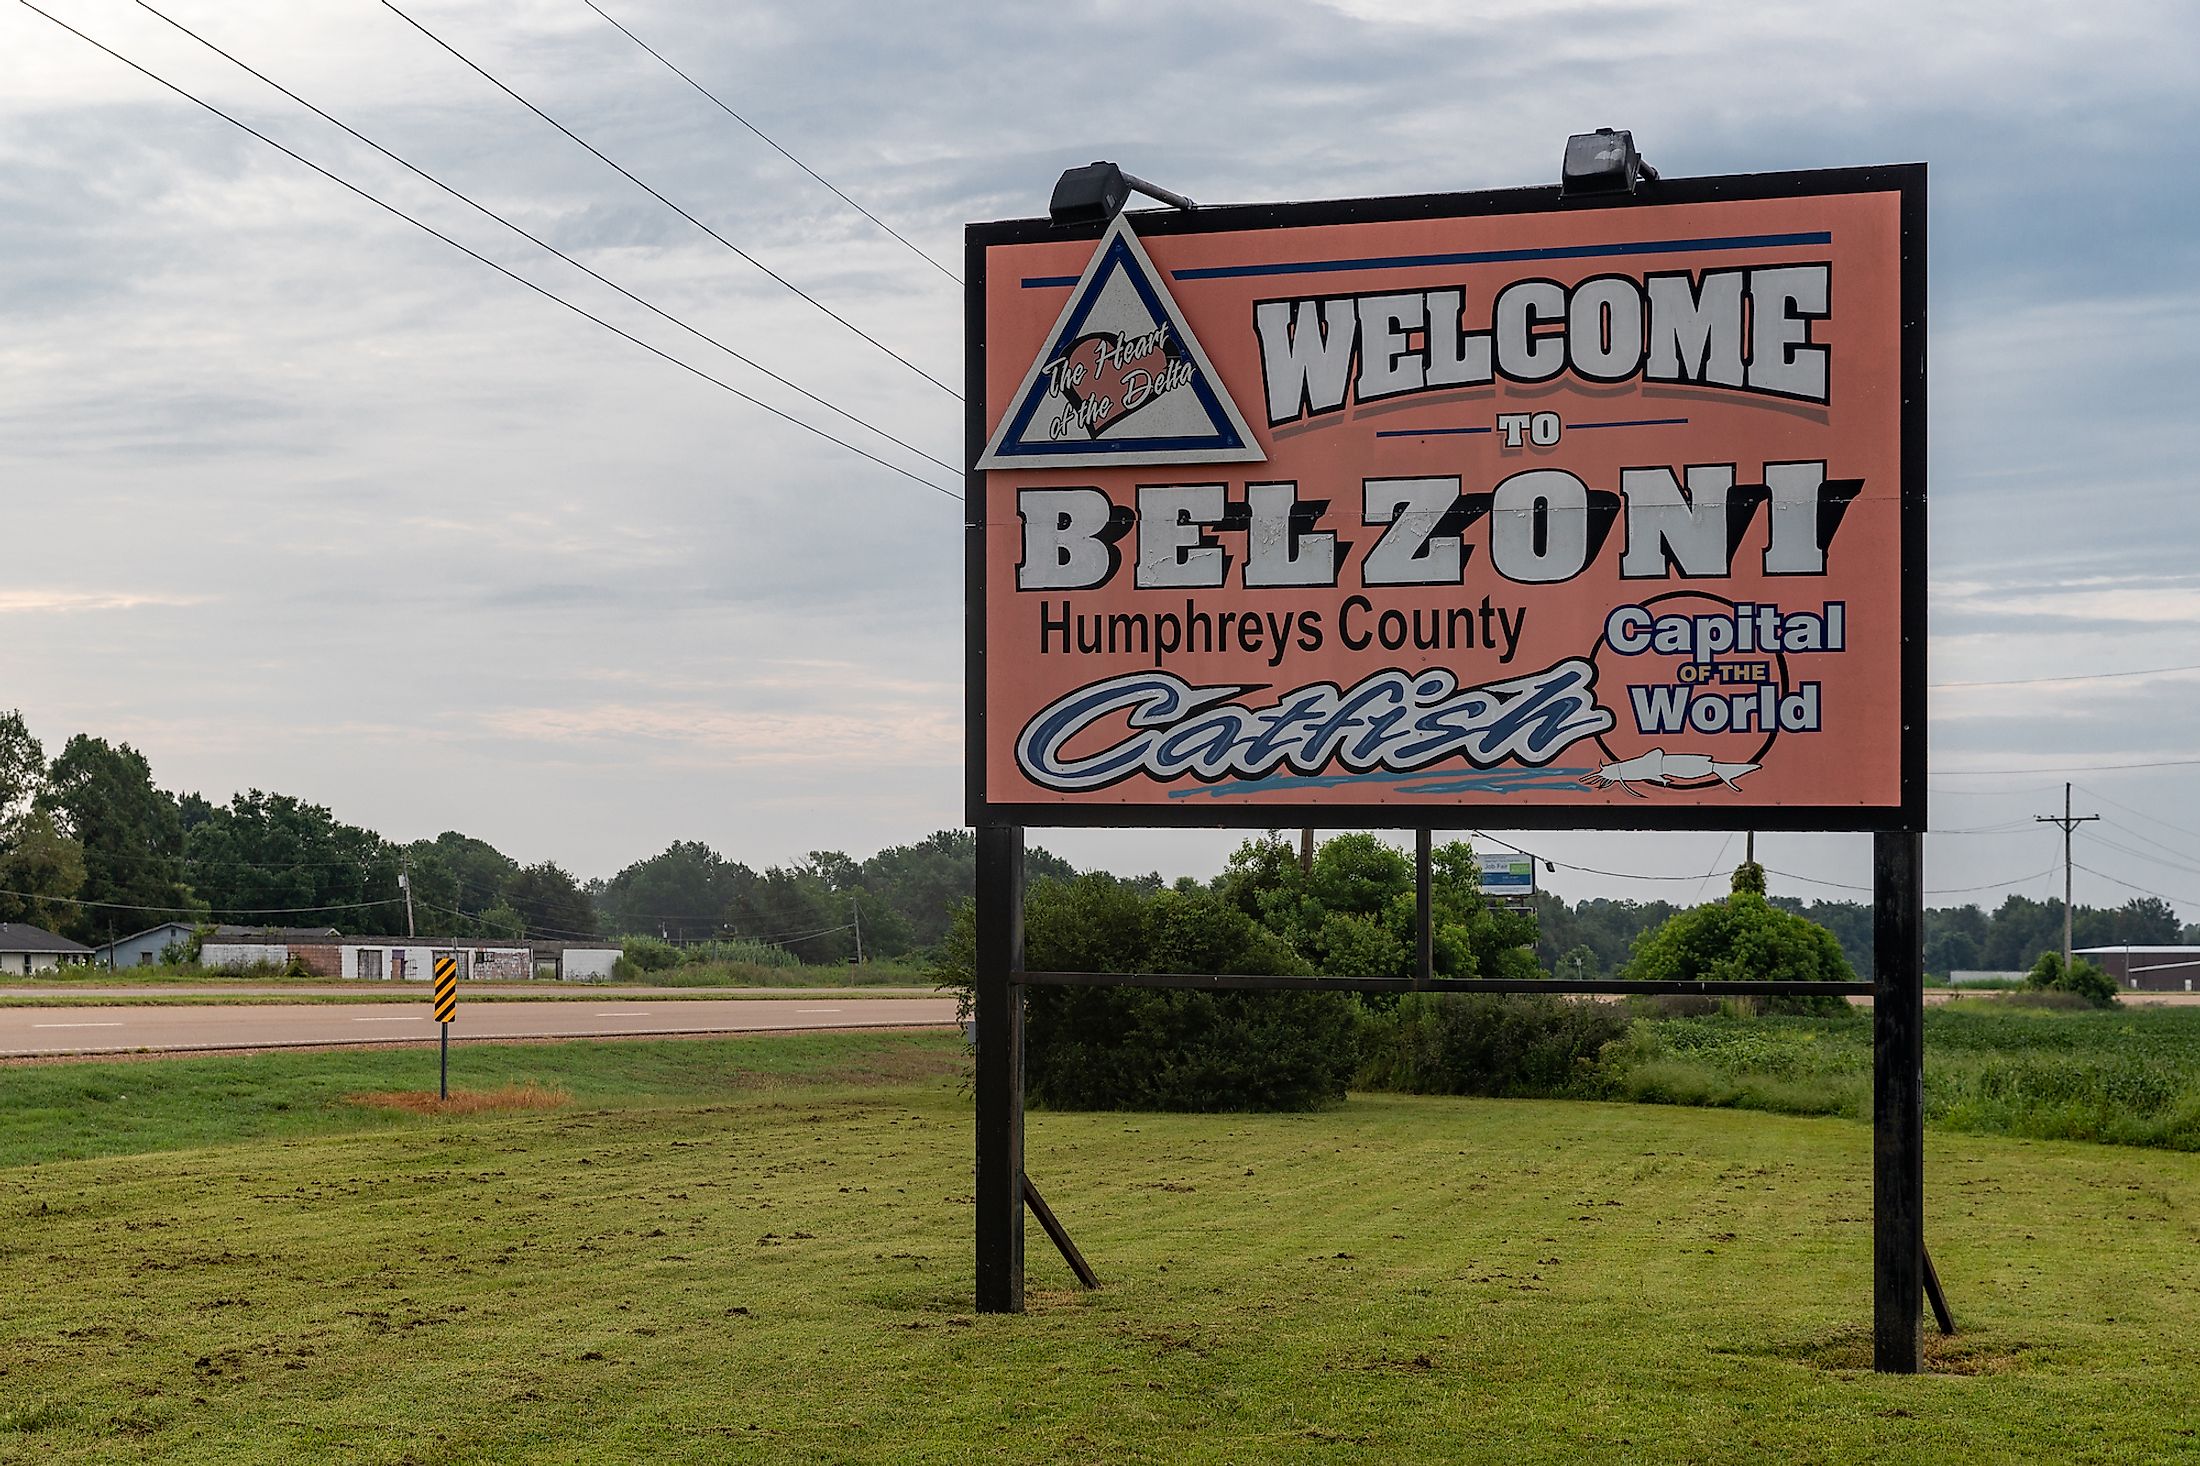 Welcome sign at Belzoni, Mississippi. Editorial credit: Chad Robertson Media / Shutterstock.com